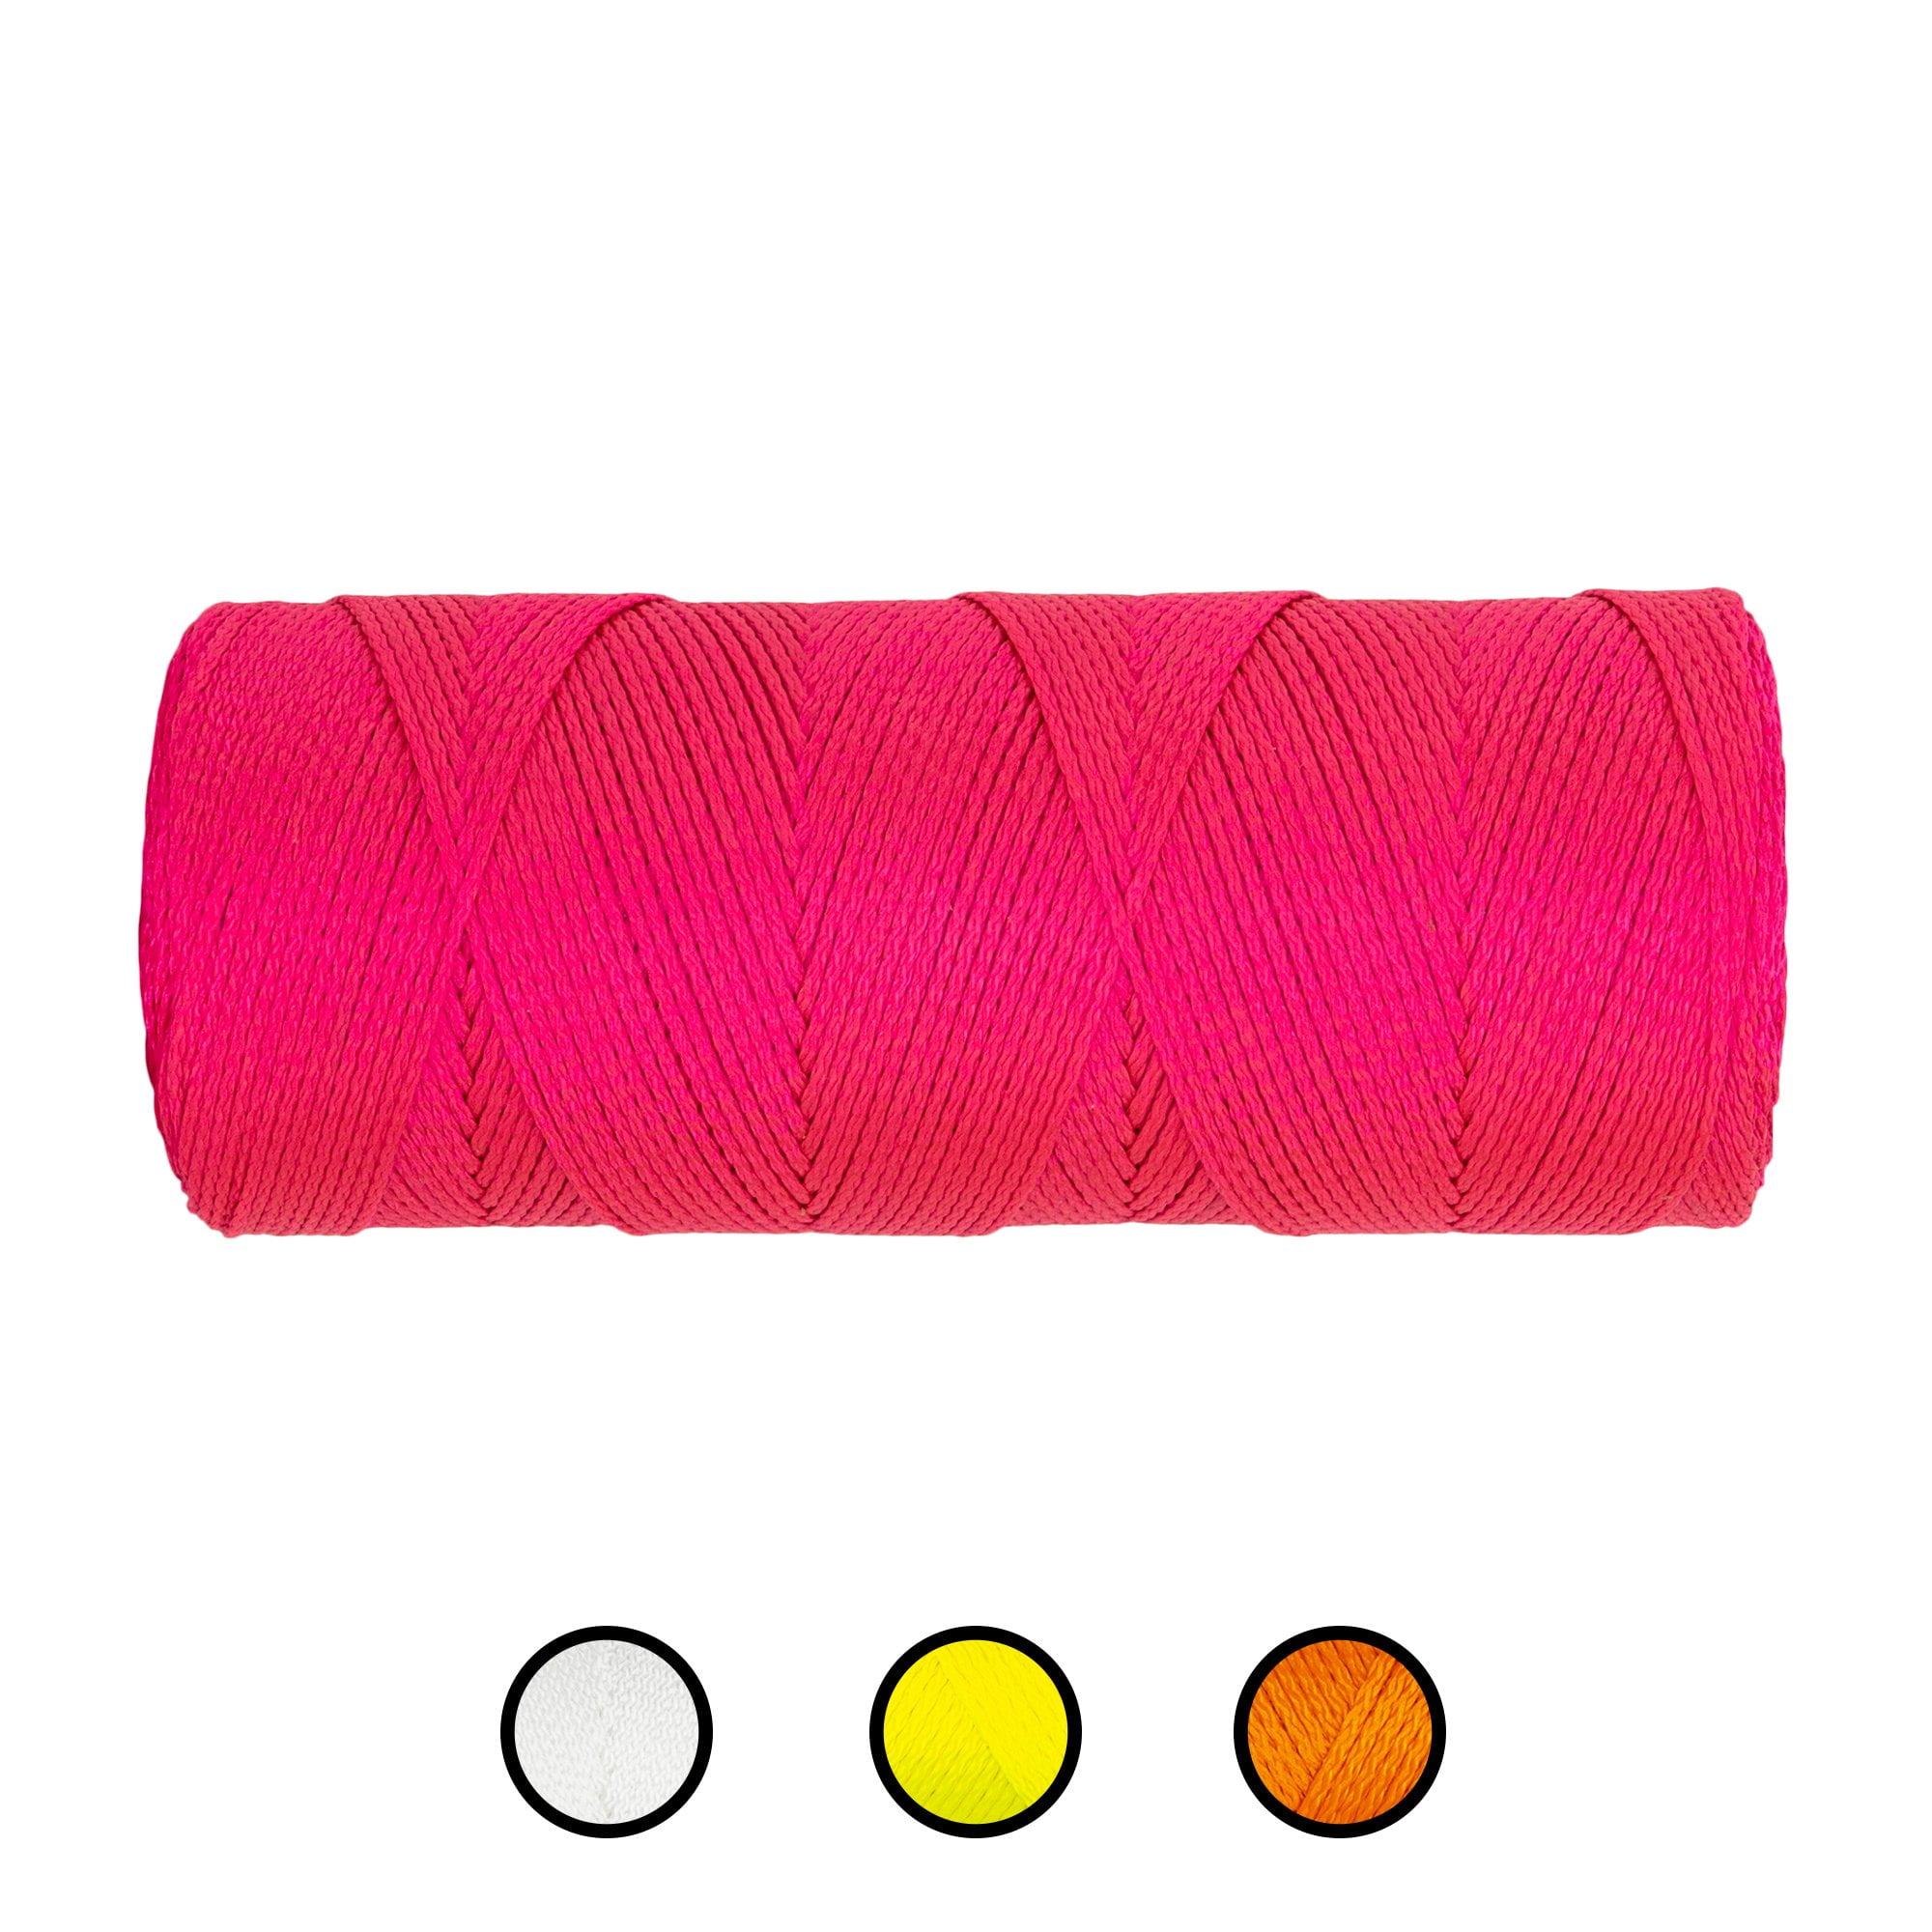 Mutual Industries Nylon Mason Twine, 1/2 lb. Twisted, 18 x 550 ft., Glo Pink (Pack of 6)